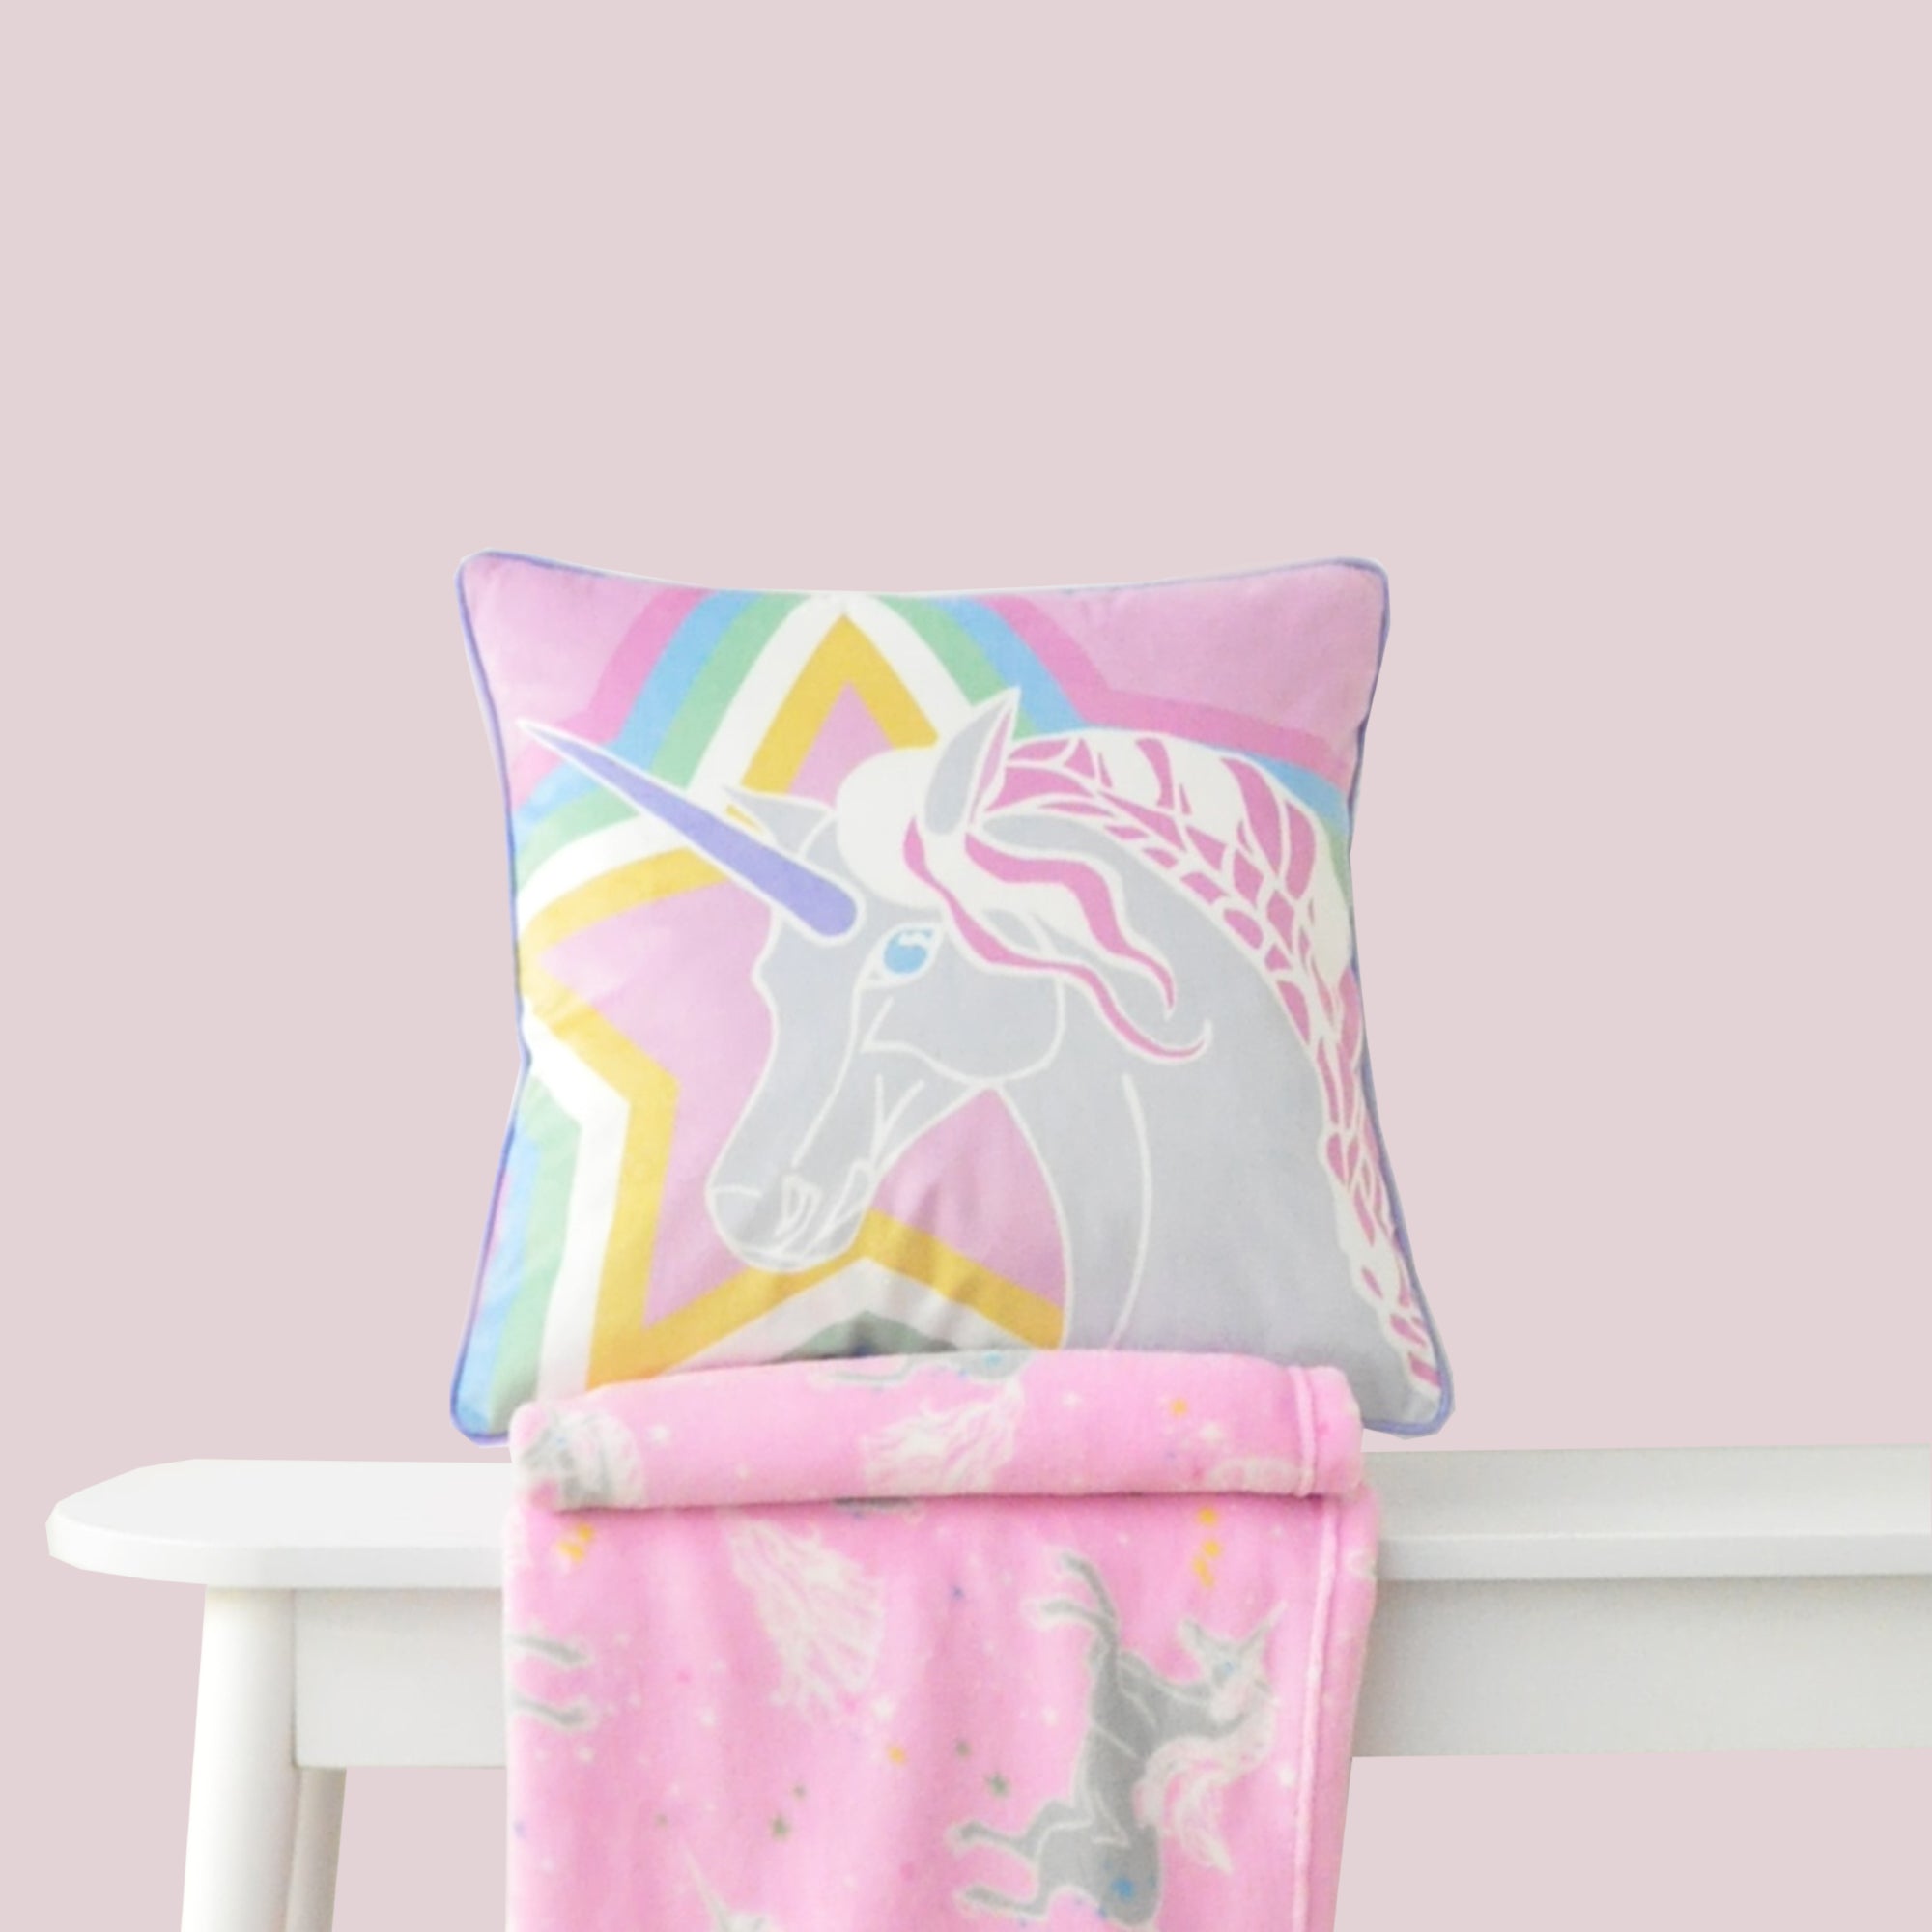 Filled Cushion Unicorn by Bedlam in Pink